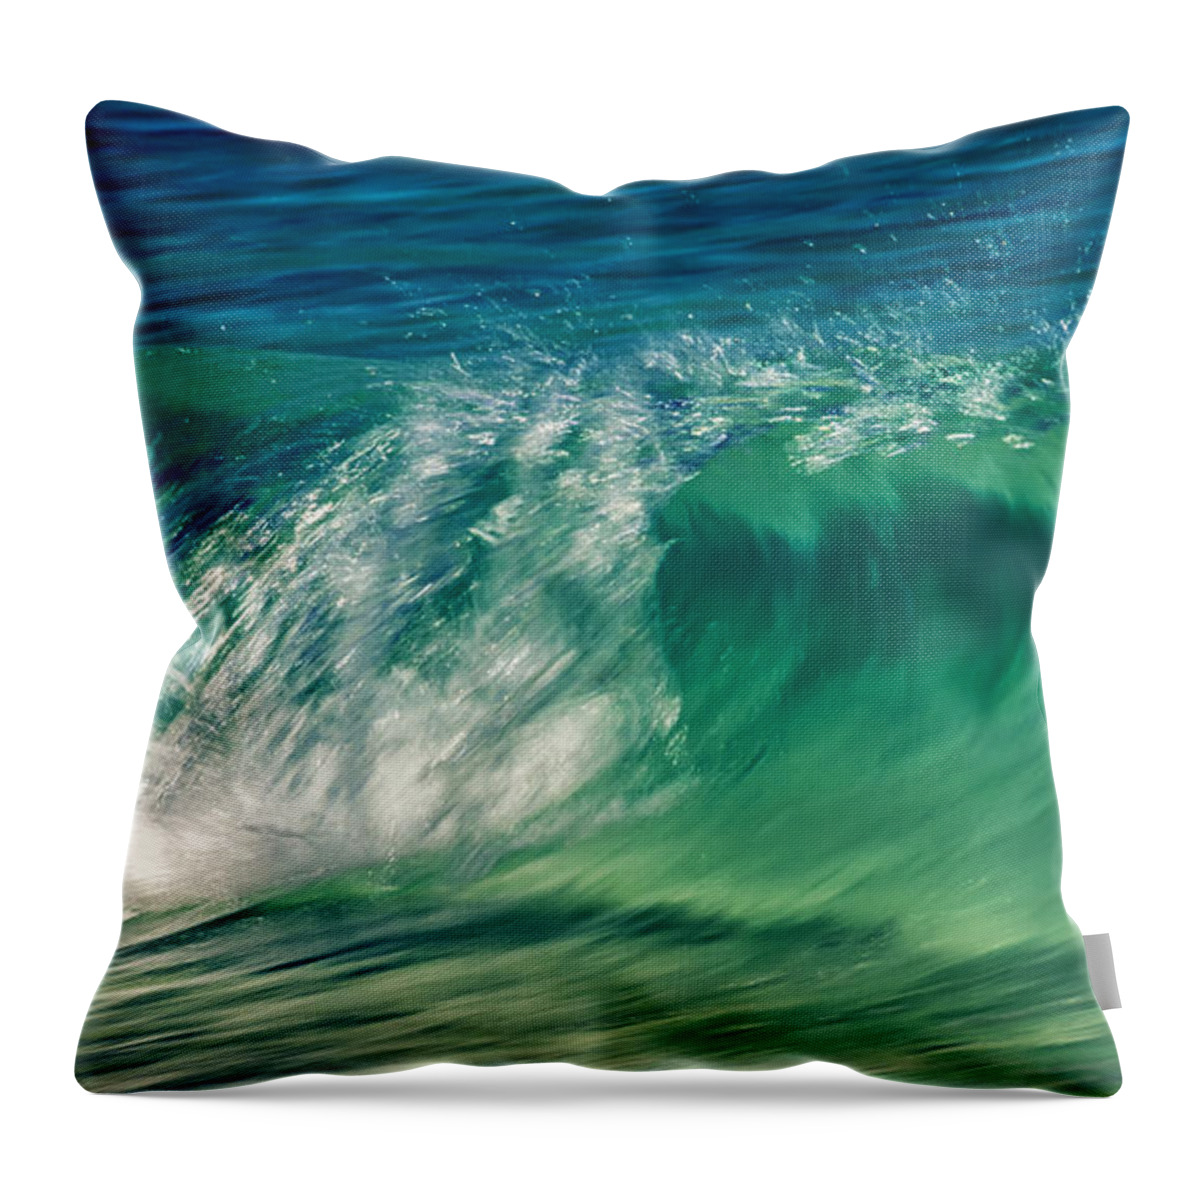 Abstract Throw Pillow featuring the photograph Ocean Ripples by Stelios Kleanthous